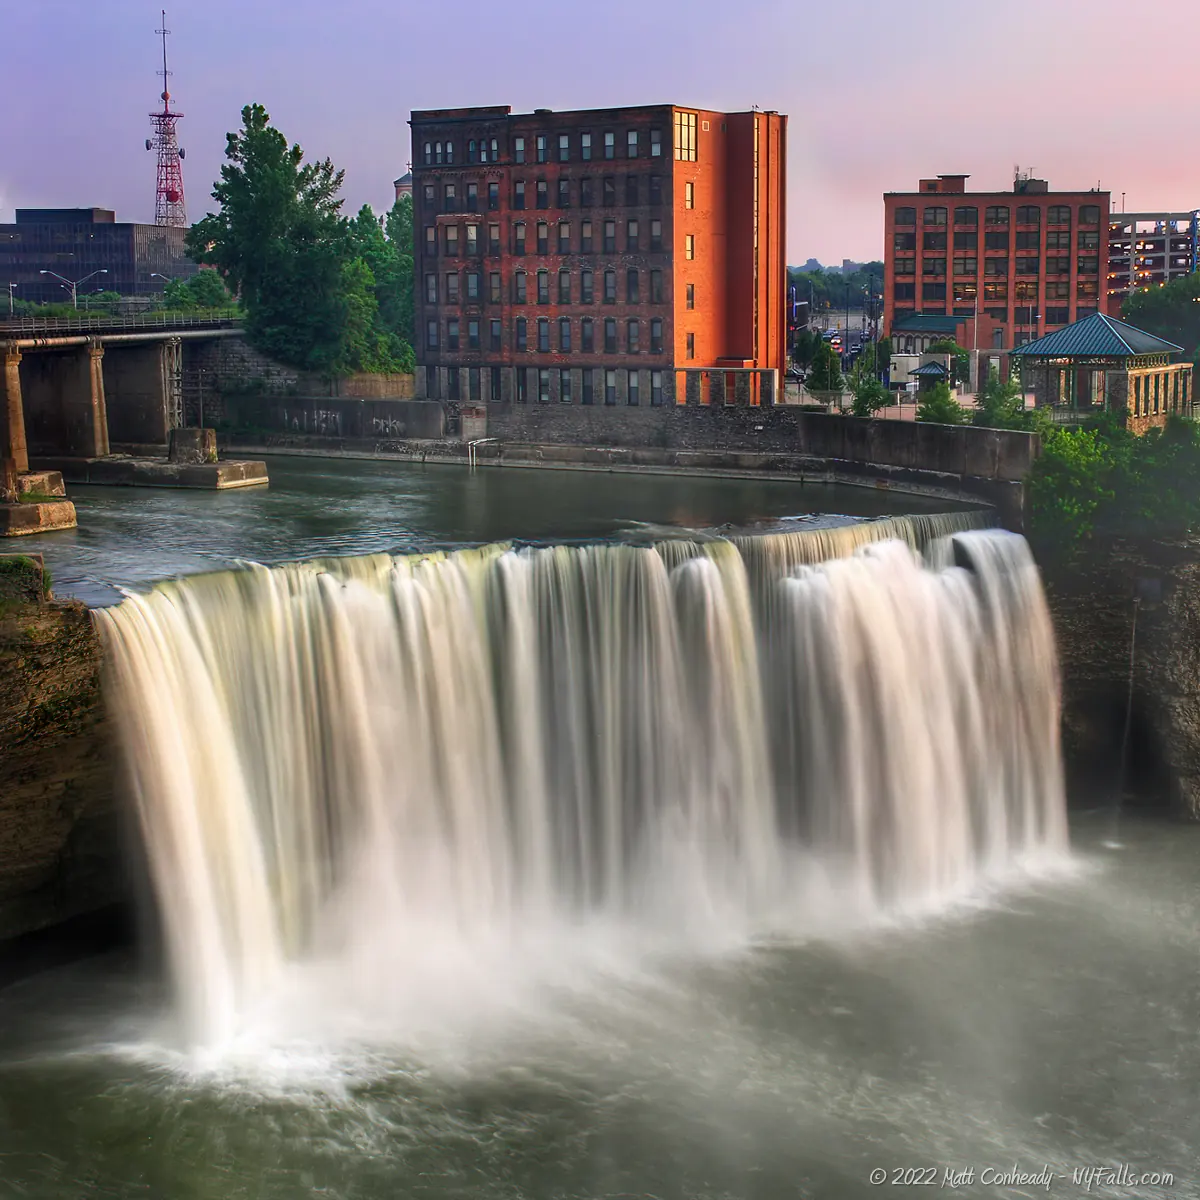 High Falls at Dusk seen from the brewery side of the gorge. Next to the Falls is the Gorsline Building